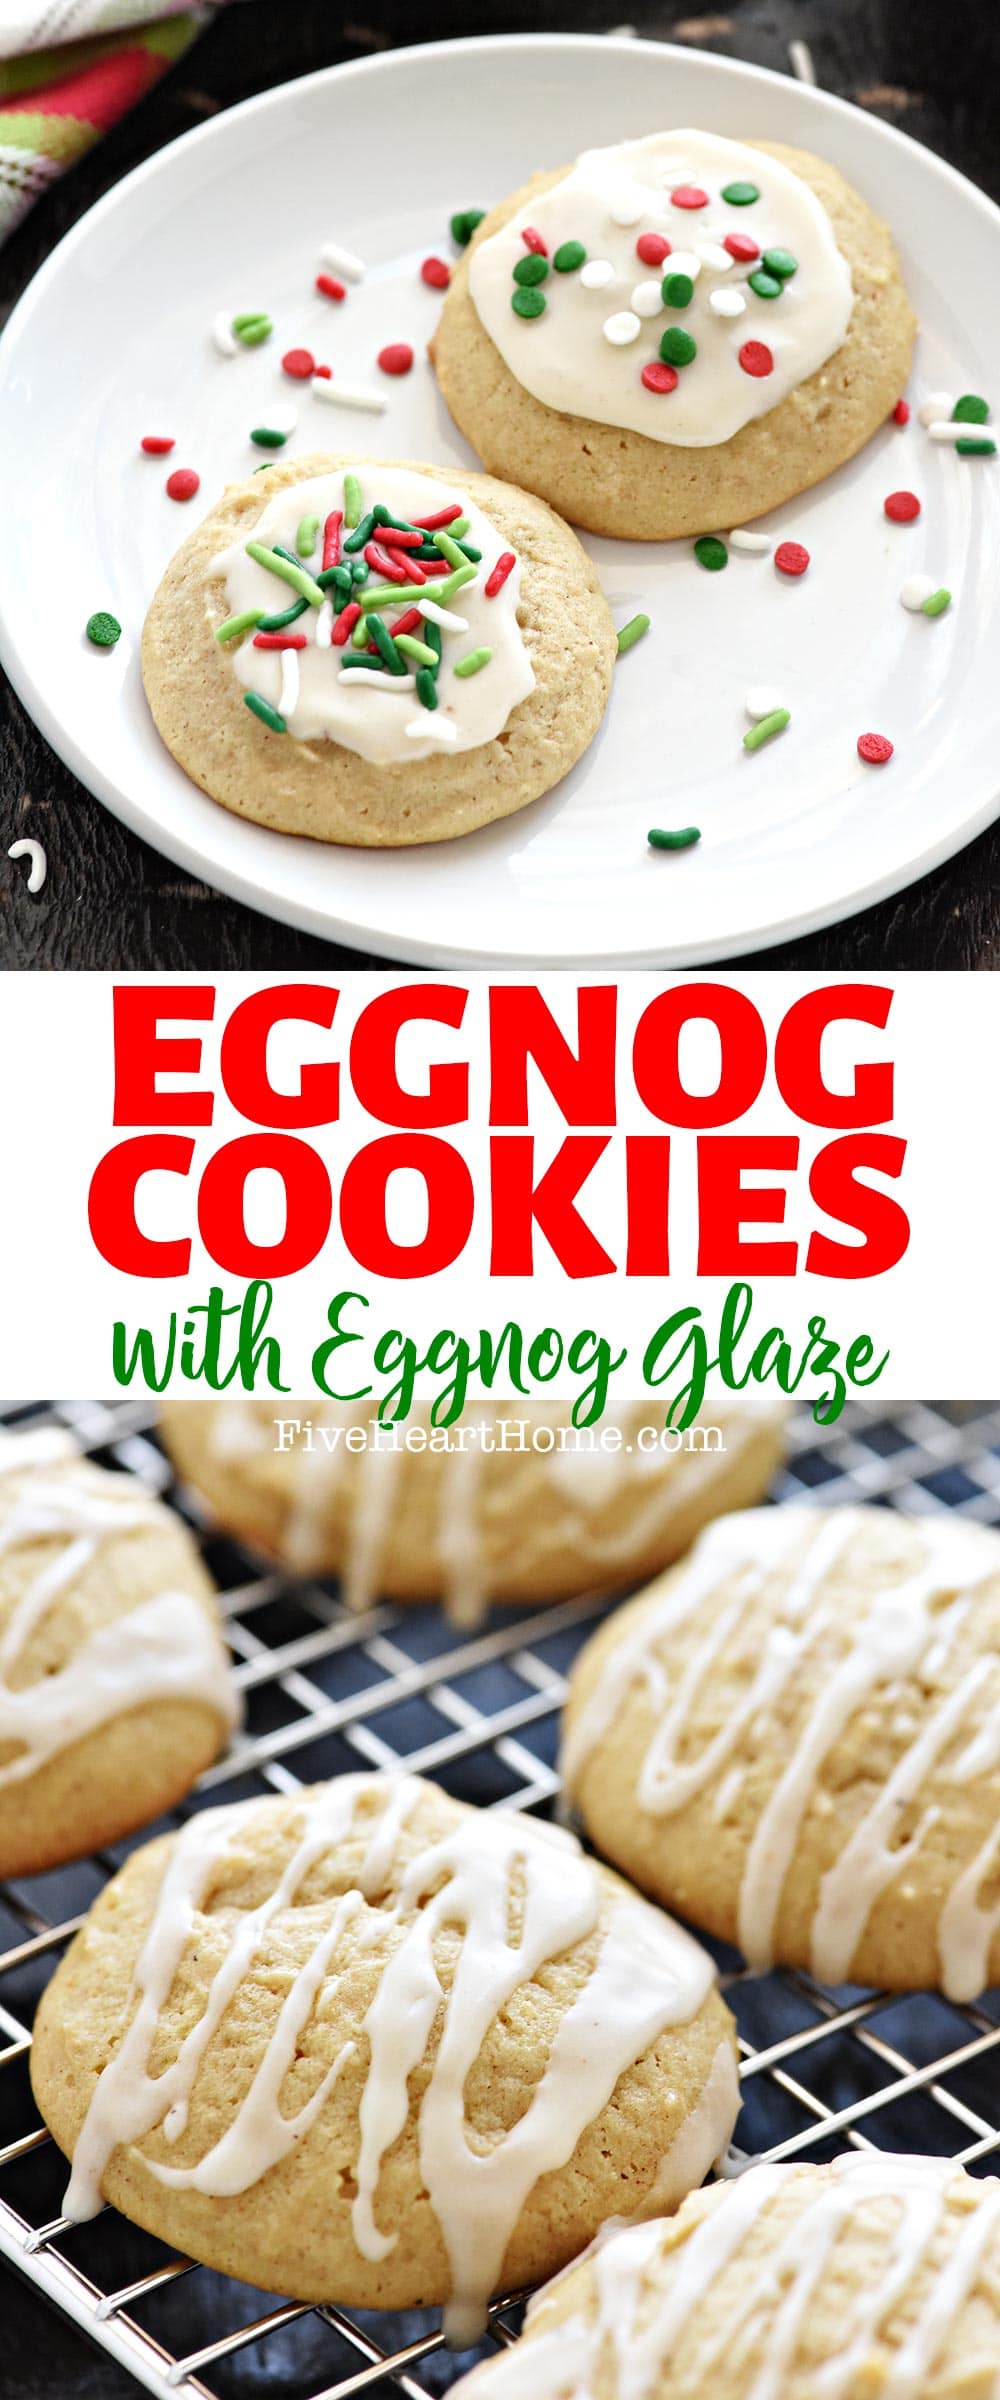 Eggnog Cookies ~ these Christmas cookies are soft, tender, and delicately flavored with eggnog and spices before being topped with a sweet eggnog glaze and festive Christmas sprinkles! | FiveHeartHome.com via @fivehearthome